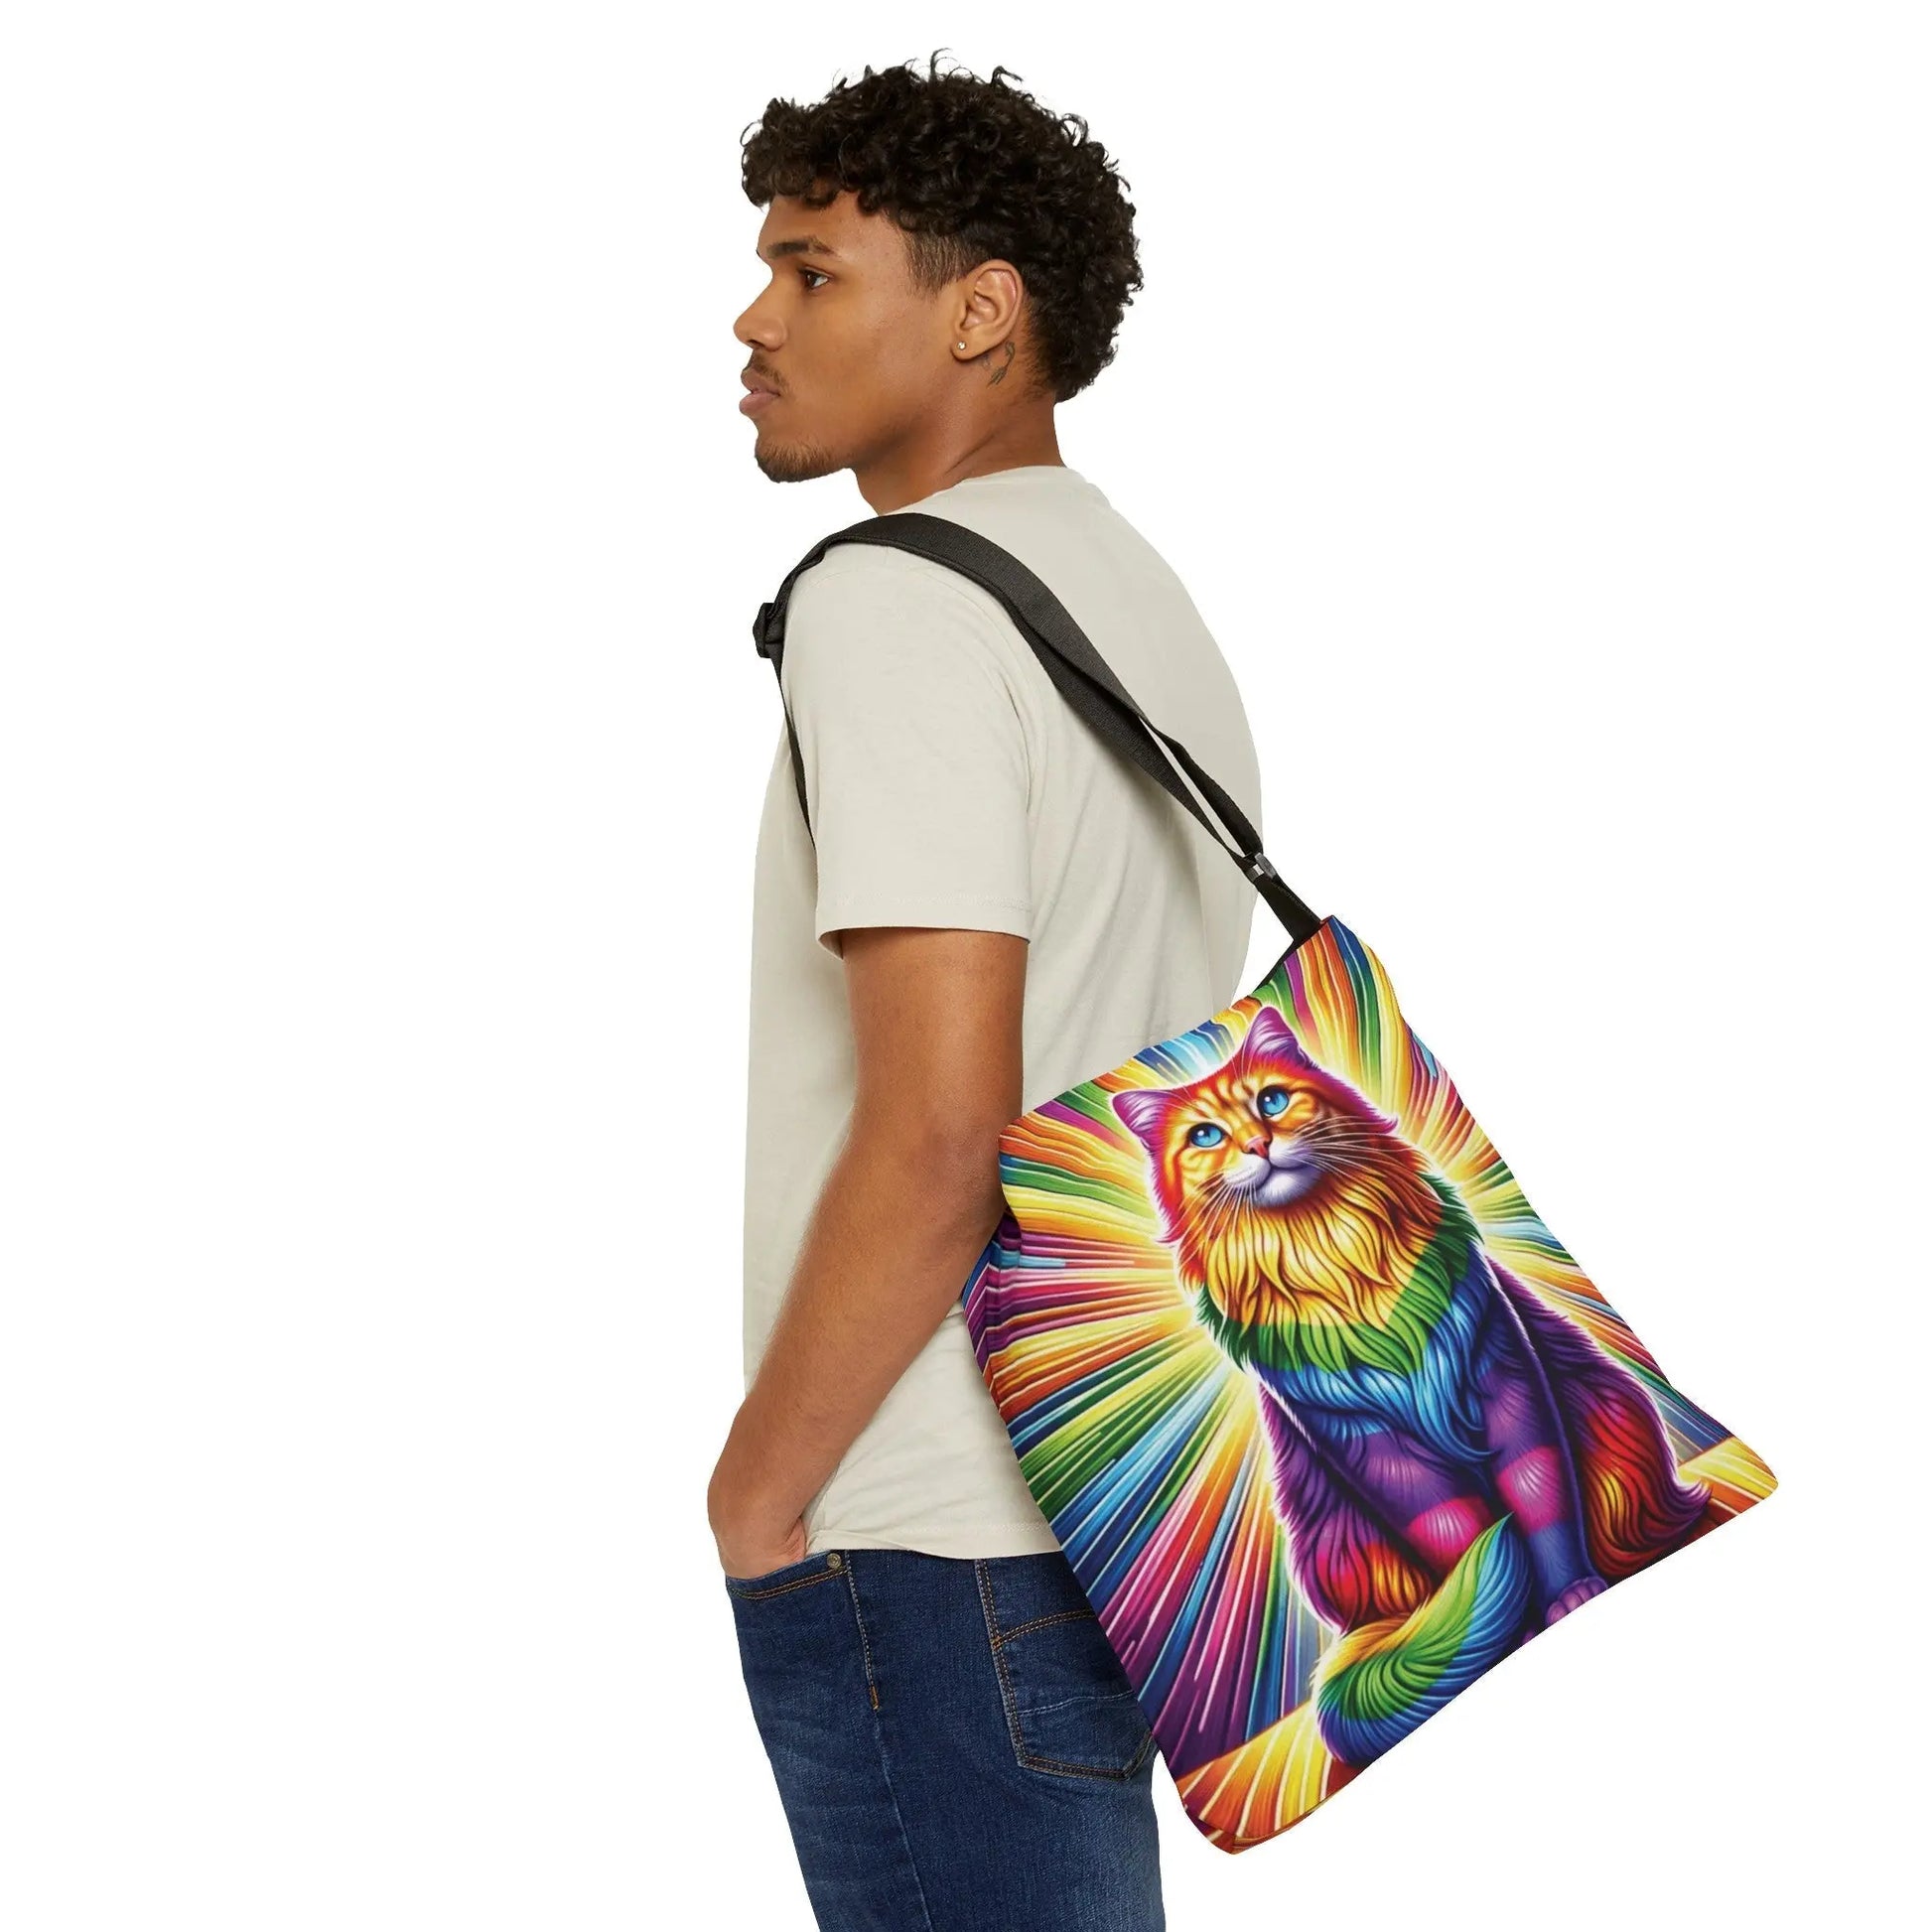 Rainbow Fluffy Cat - Adjustable Strap -Two Sizes - Tote Bag - Bags